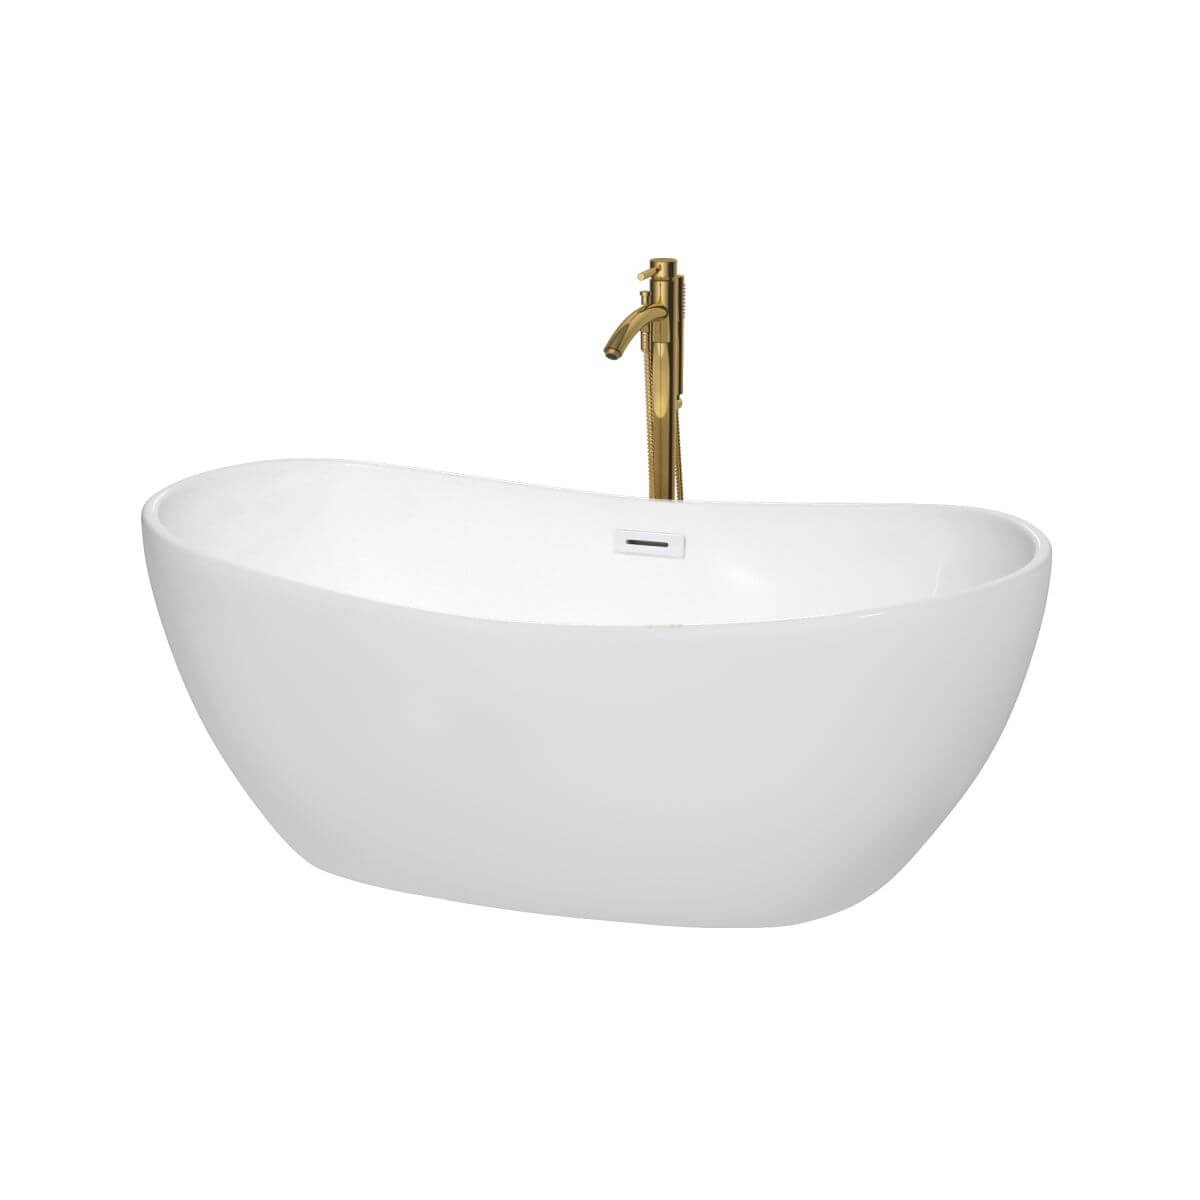 Wyndham Collection Rebecca 60 inch Freestanding Bathtub in White with Shiny White Trim and Floor Mounted Faucet in Brushed Gold - WCOBT101460SWATPGD